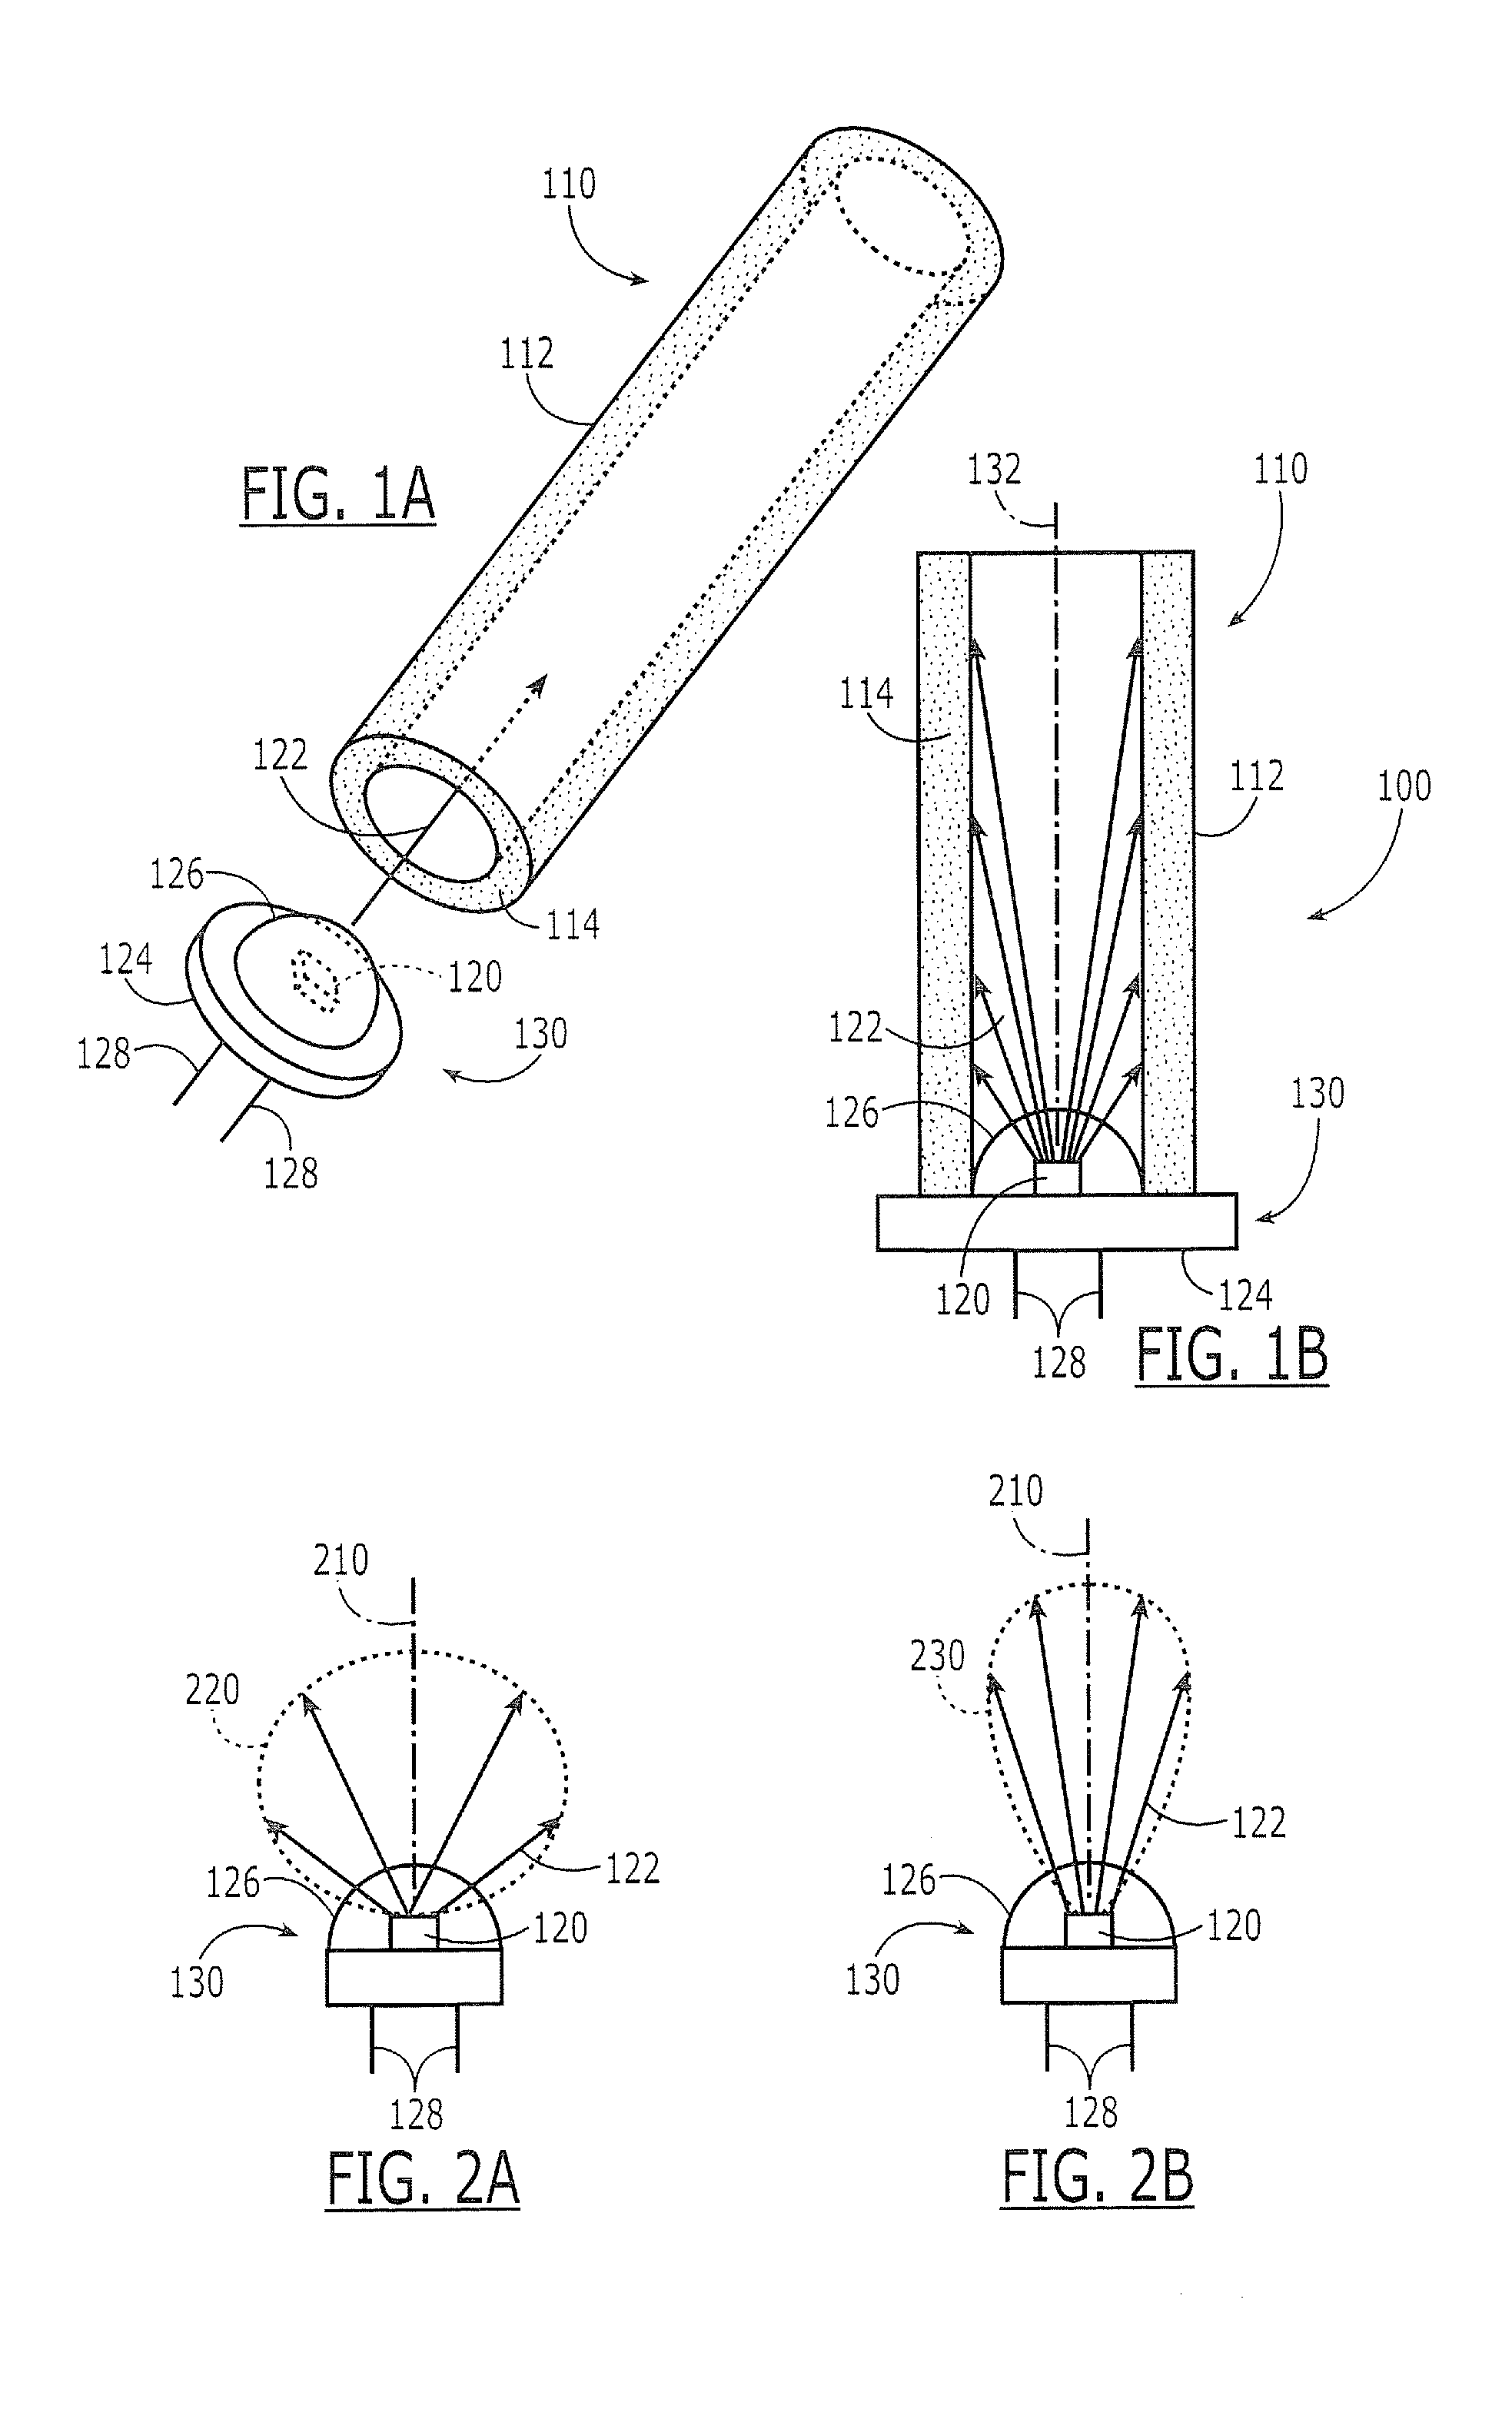 Semiconductor light emitting apparatus including elongated hollow wavelength conversion tubes and methods of assembling same